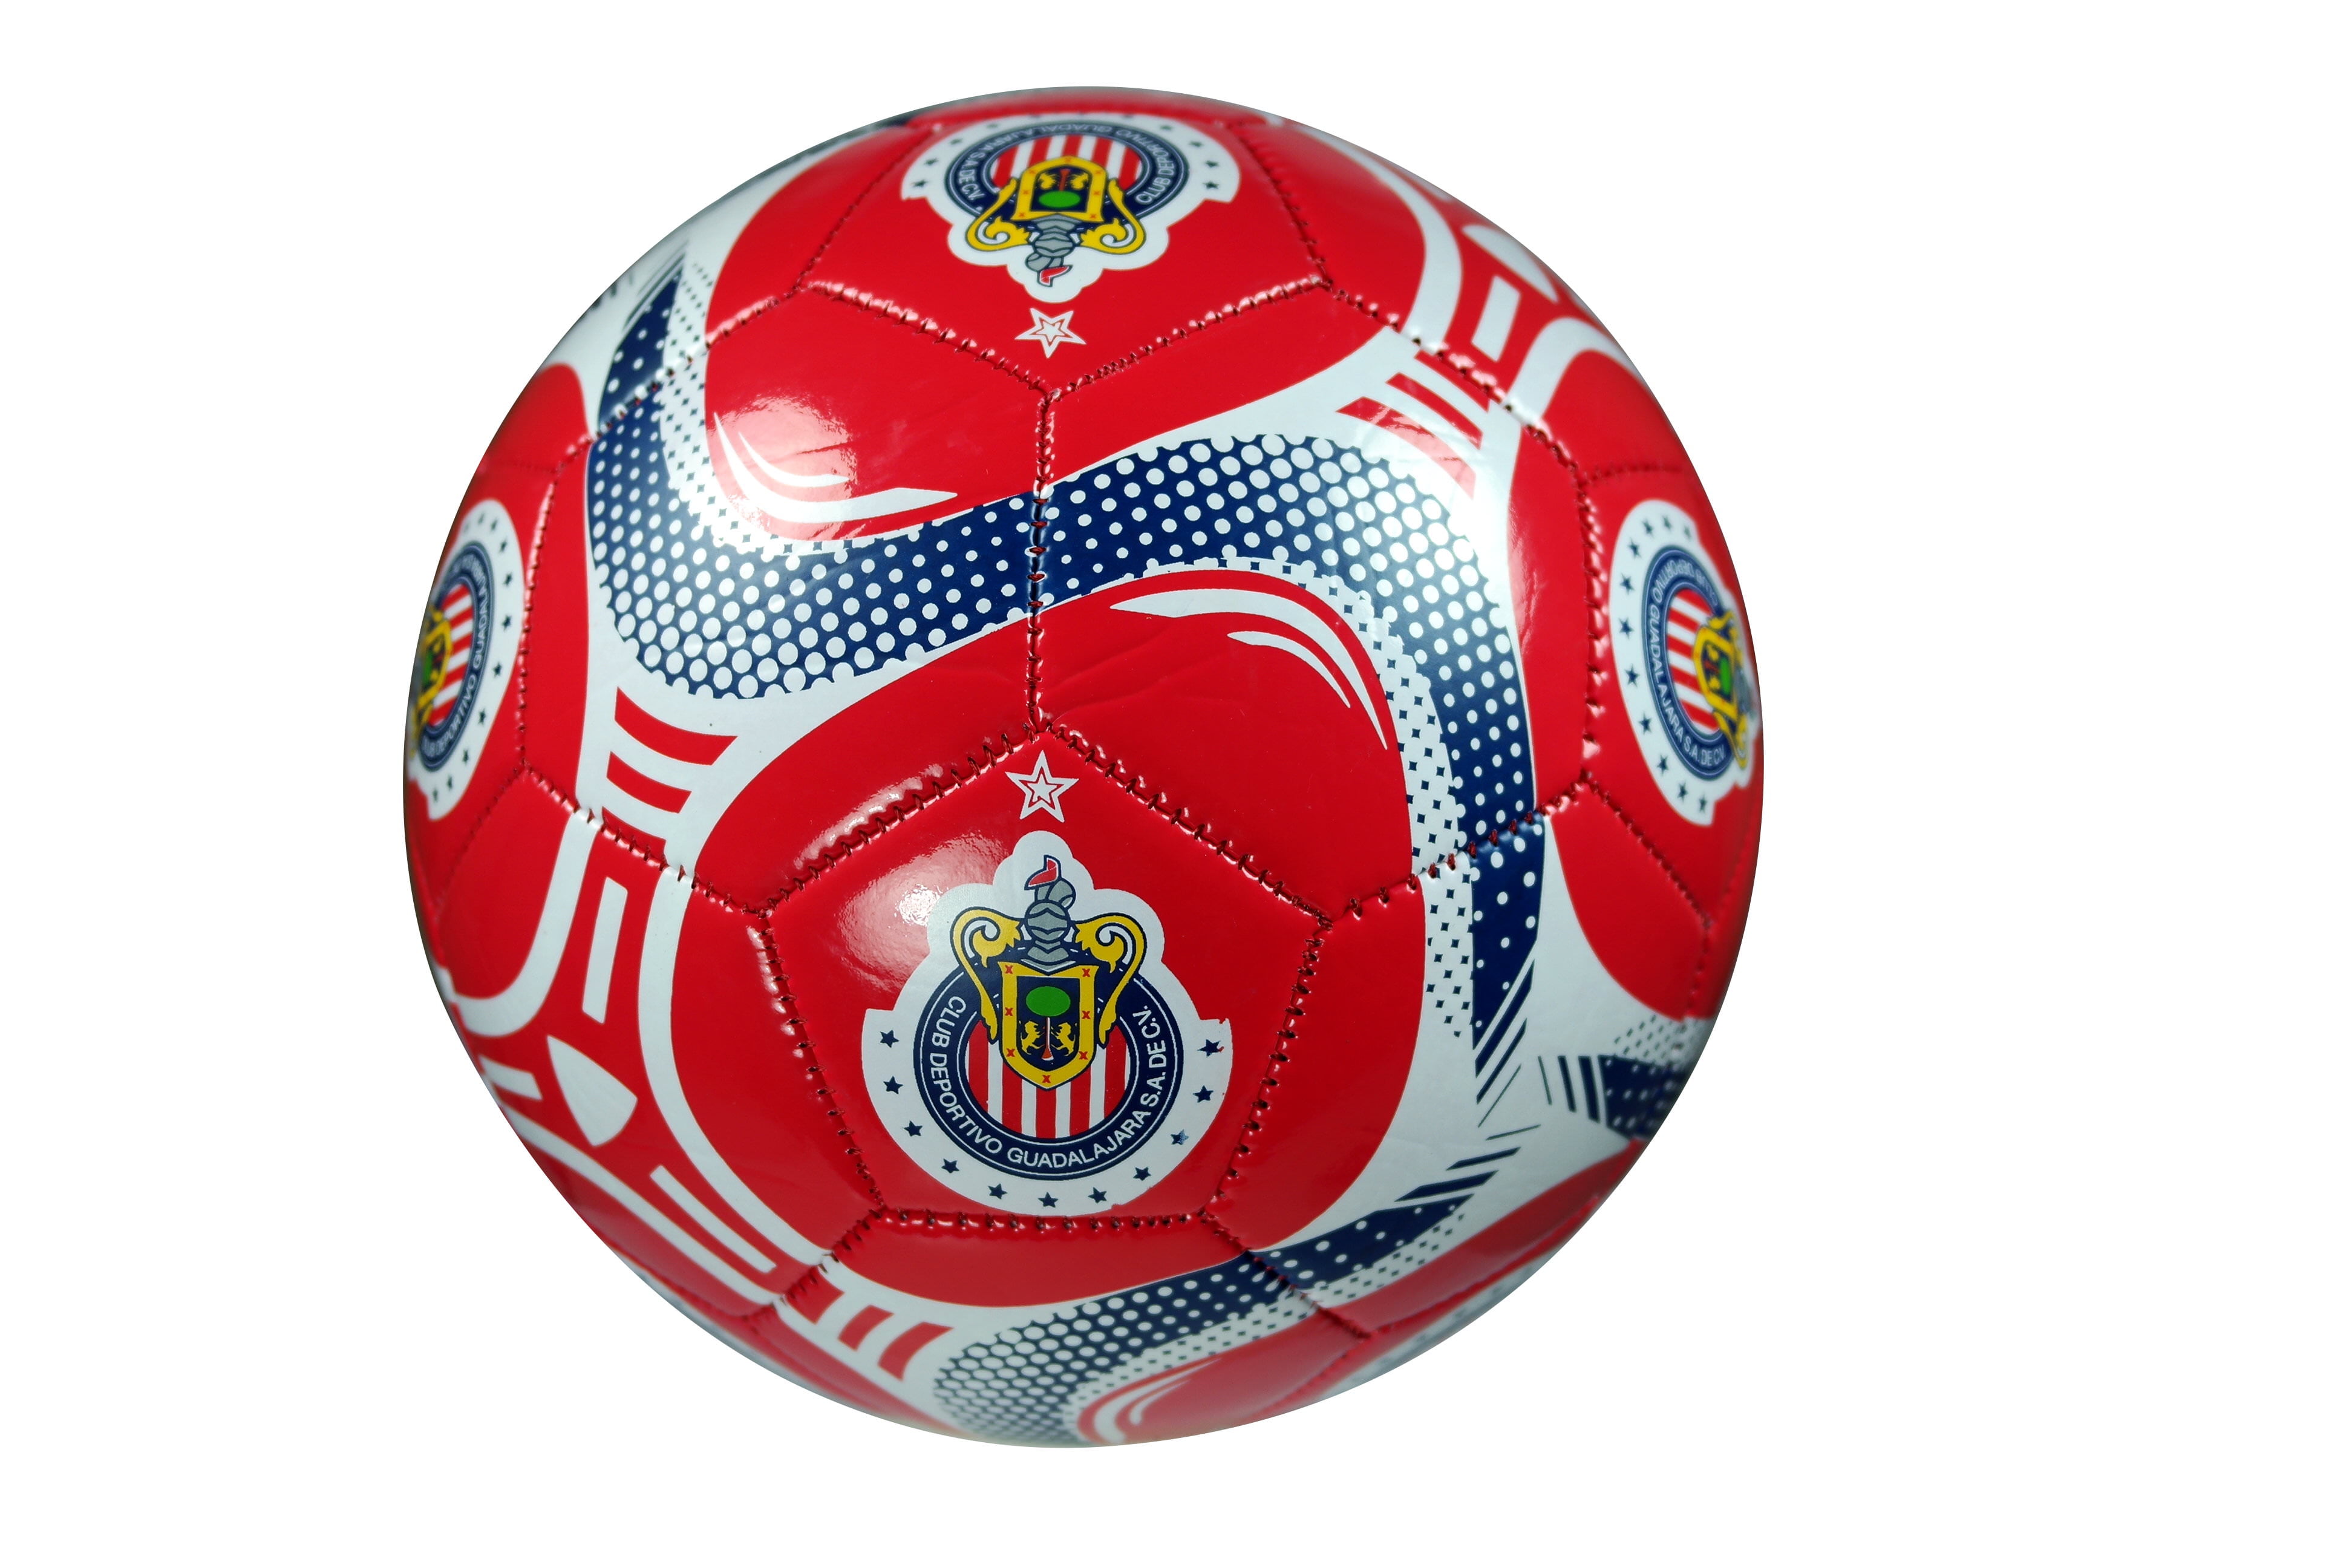 Lot of 12 Chivas top soccer ball famous ball size 5 